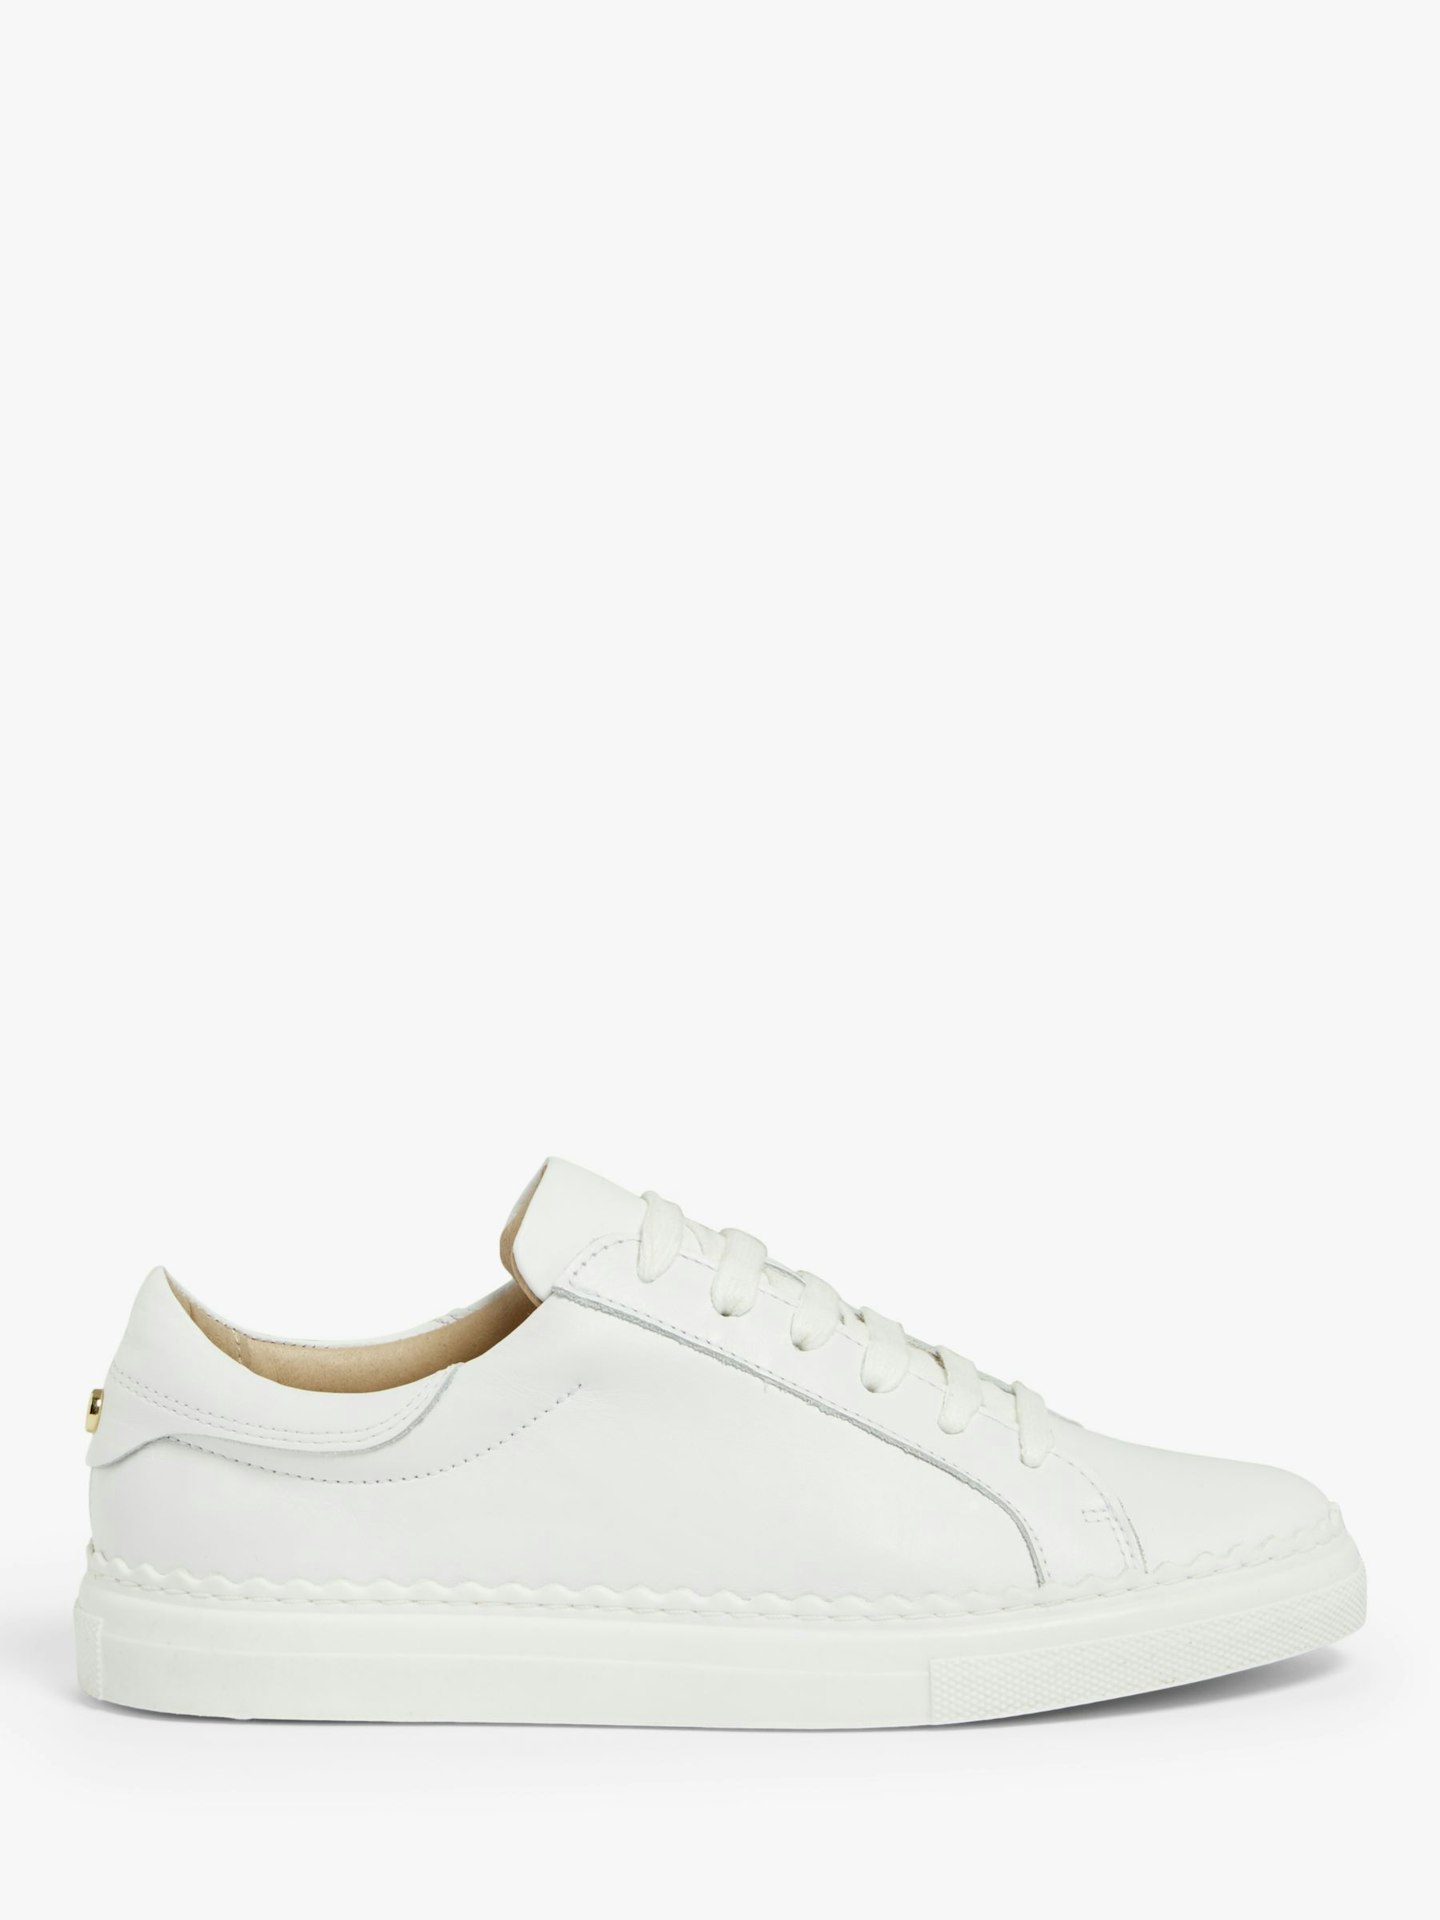 John Lewis & Partners, Fiona Scalloped Detail Leather Trainers, £79